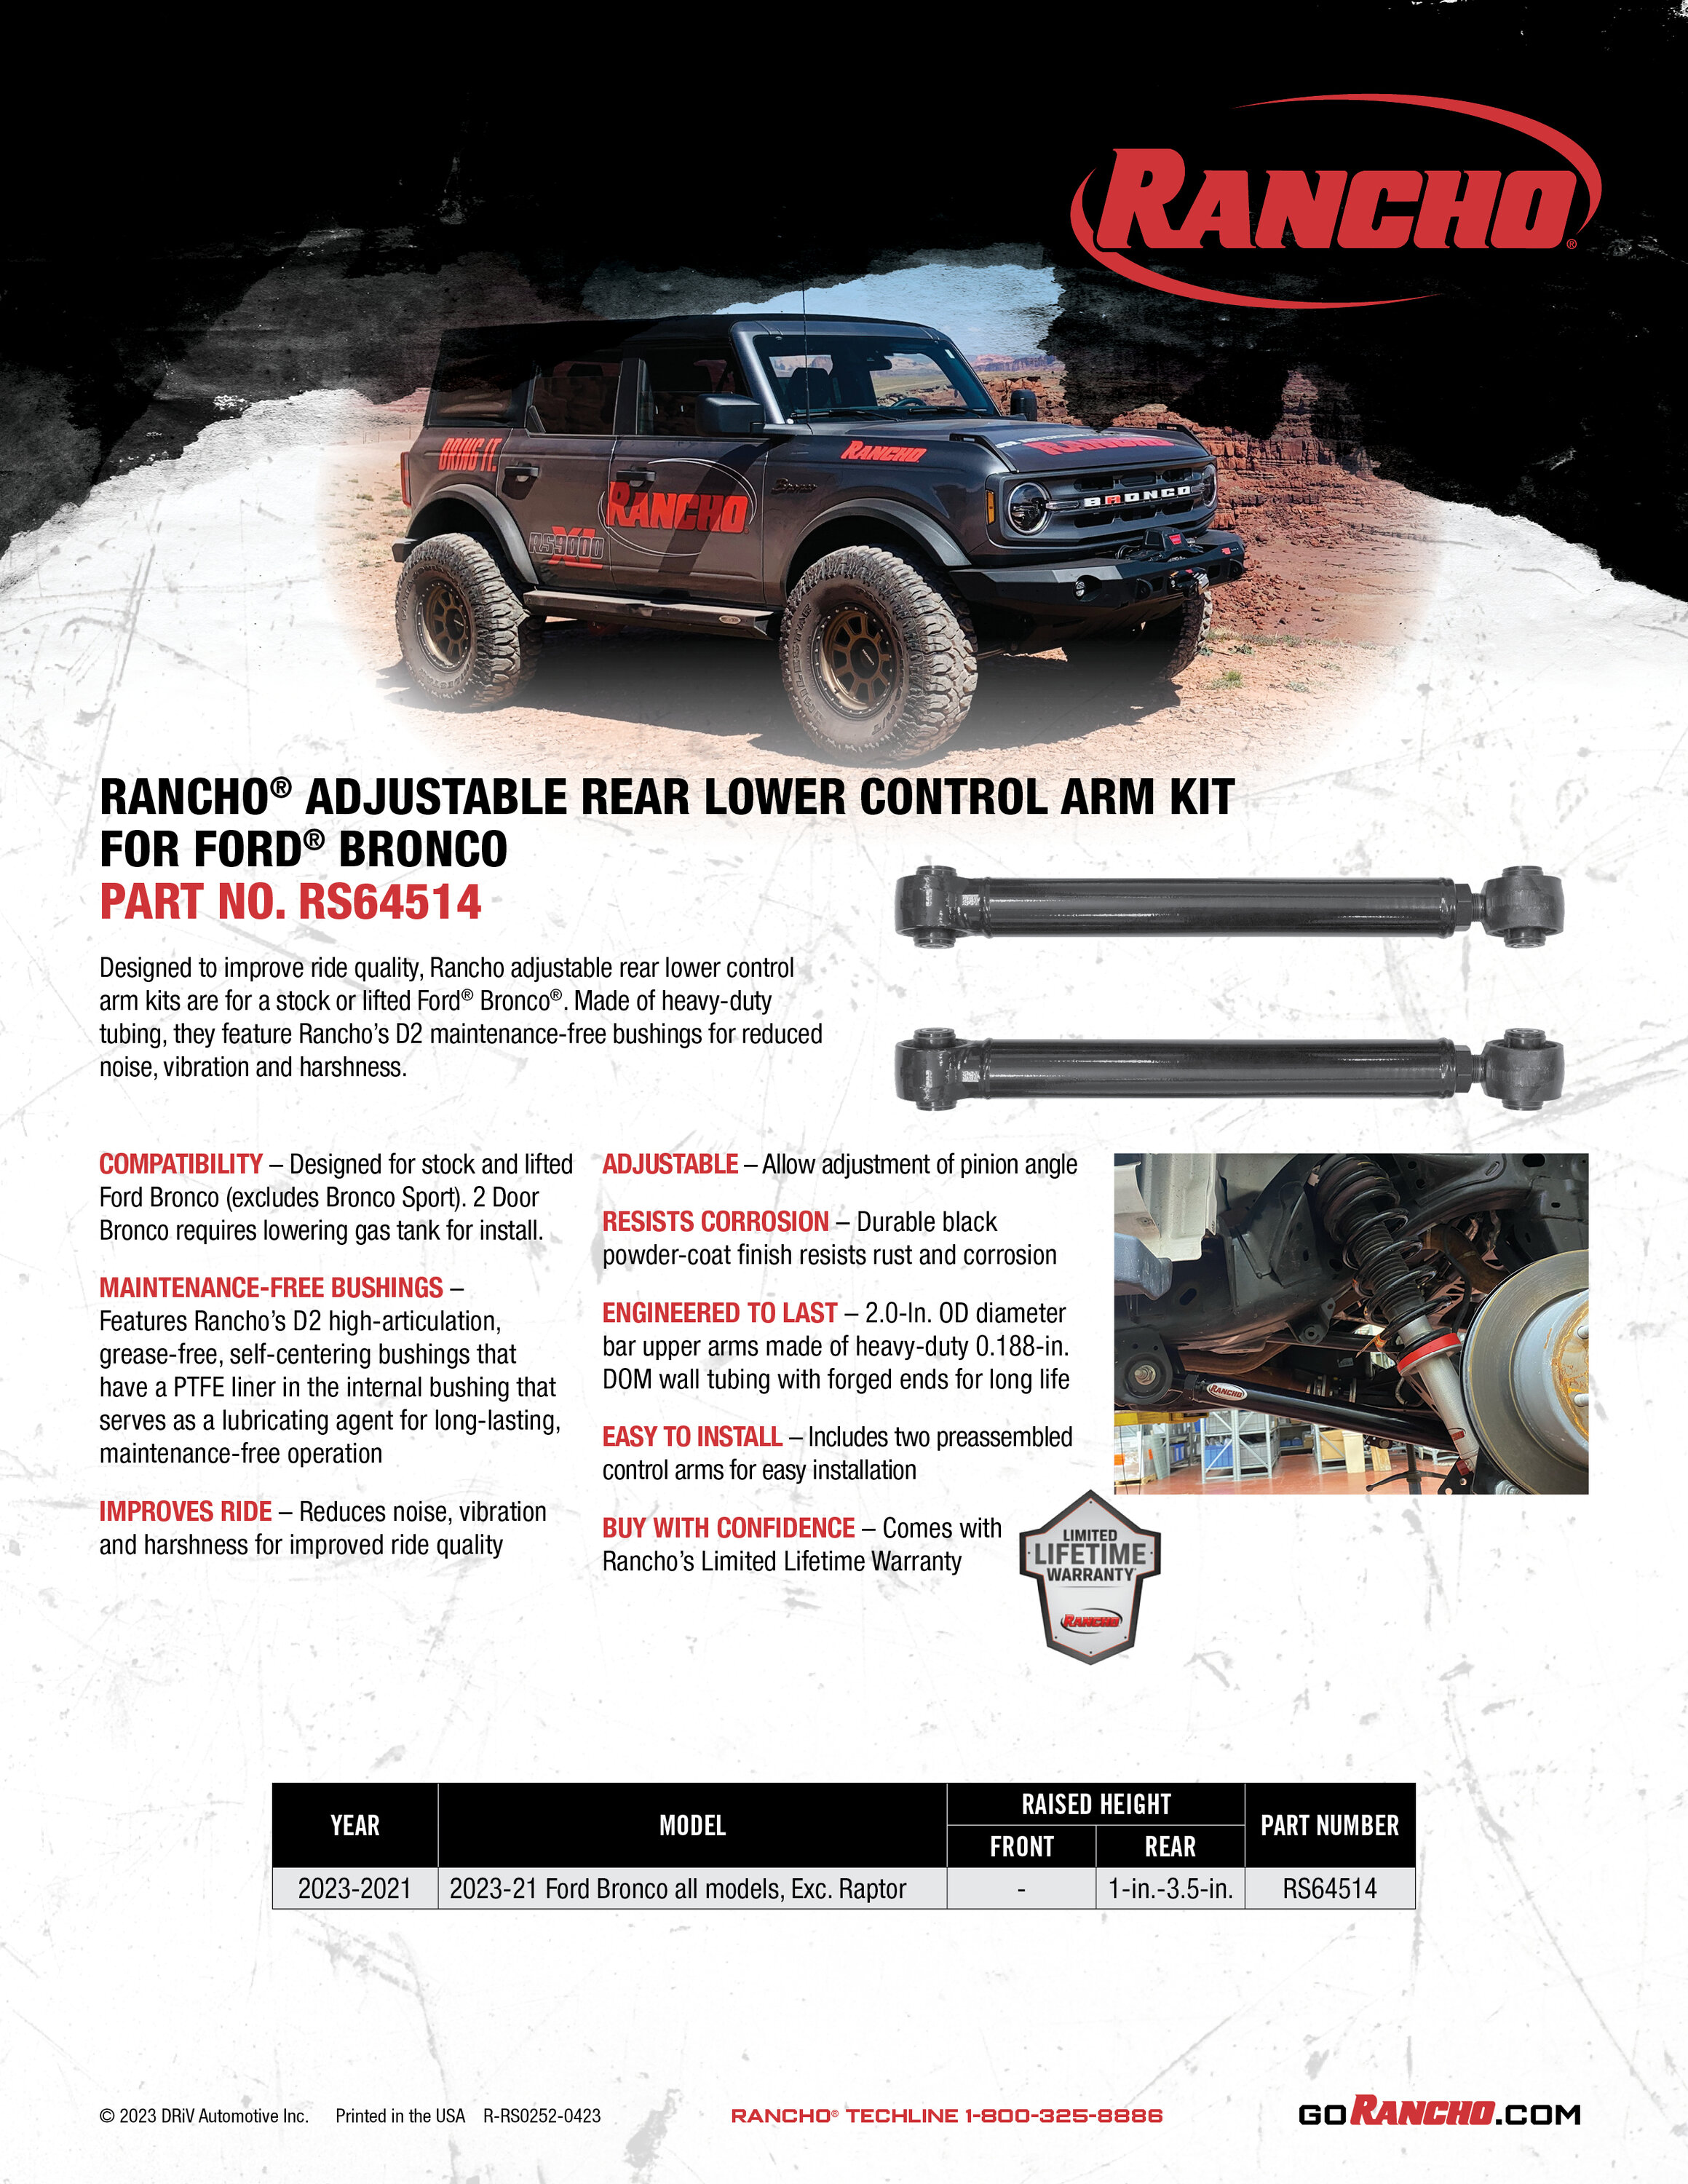 Ford Bronco Rear lower control arms for your Bronco from Rancho Bronco_RearLwrAdjControlArmKit_RS64514_Sell_032823